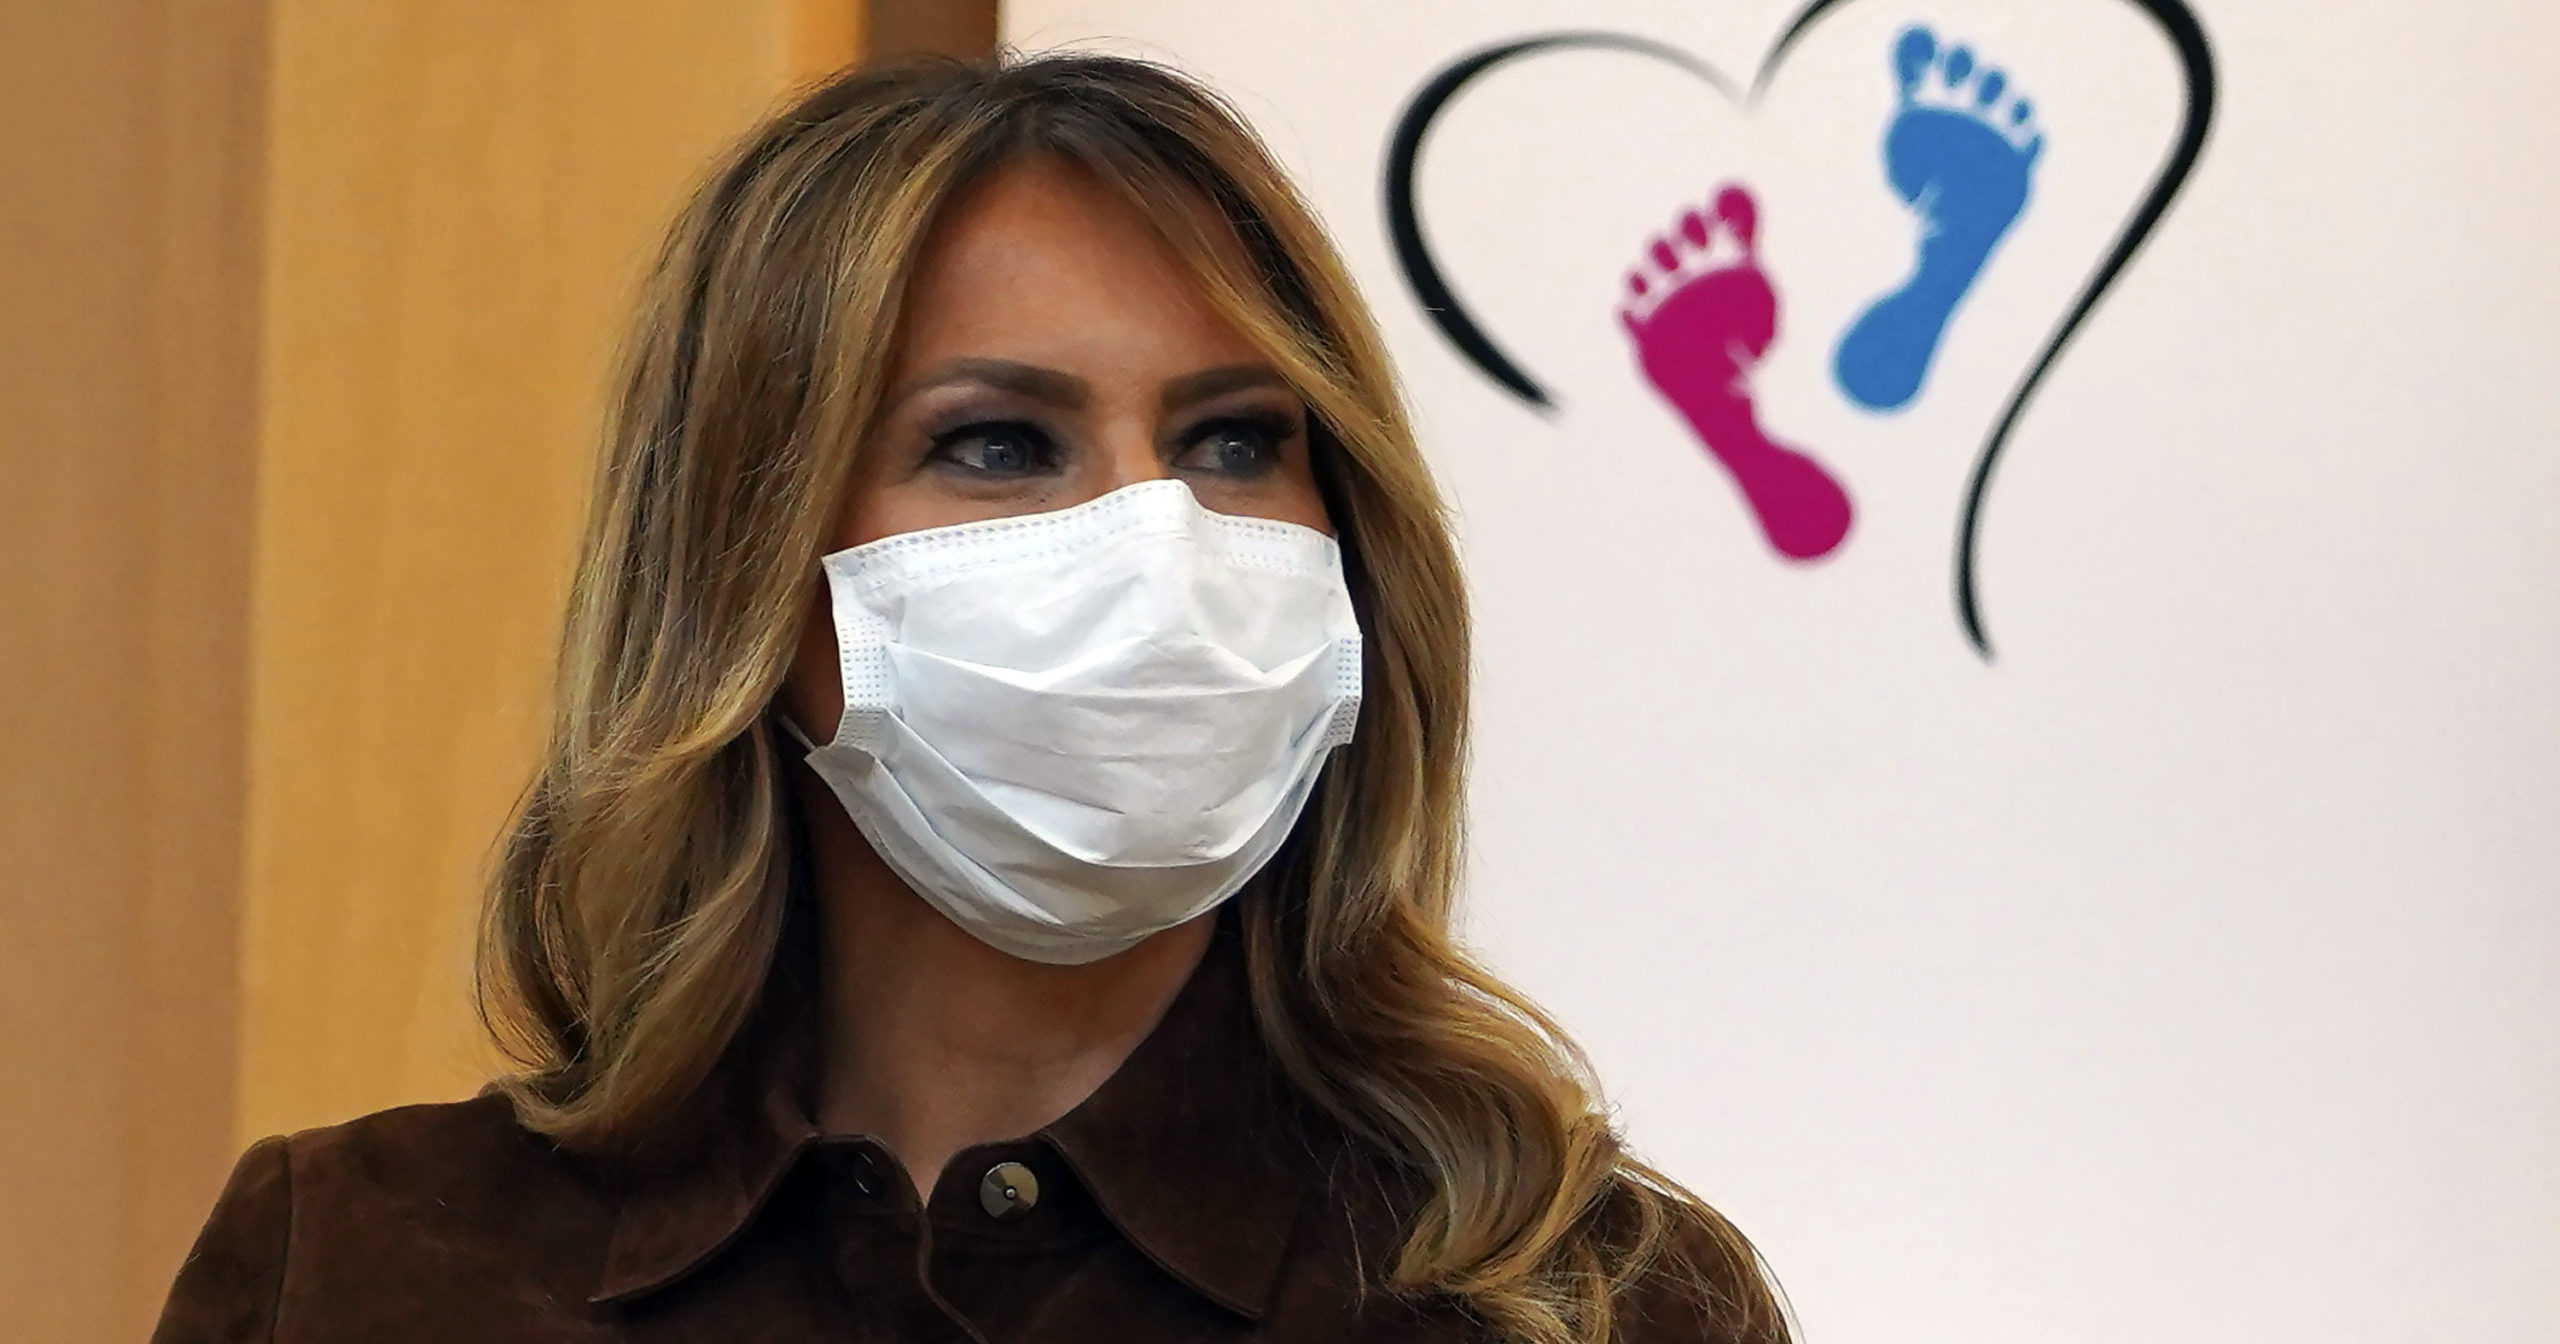 First Lady Melania Trump listens during a discussion at Concord Hospital on Sept. 17, 2020, in Concord, New Hampshire.